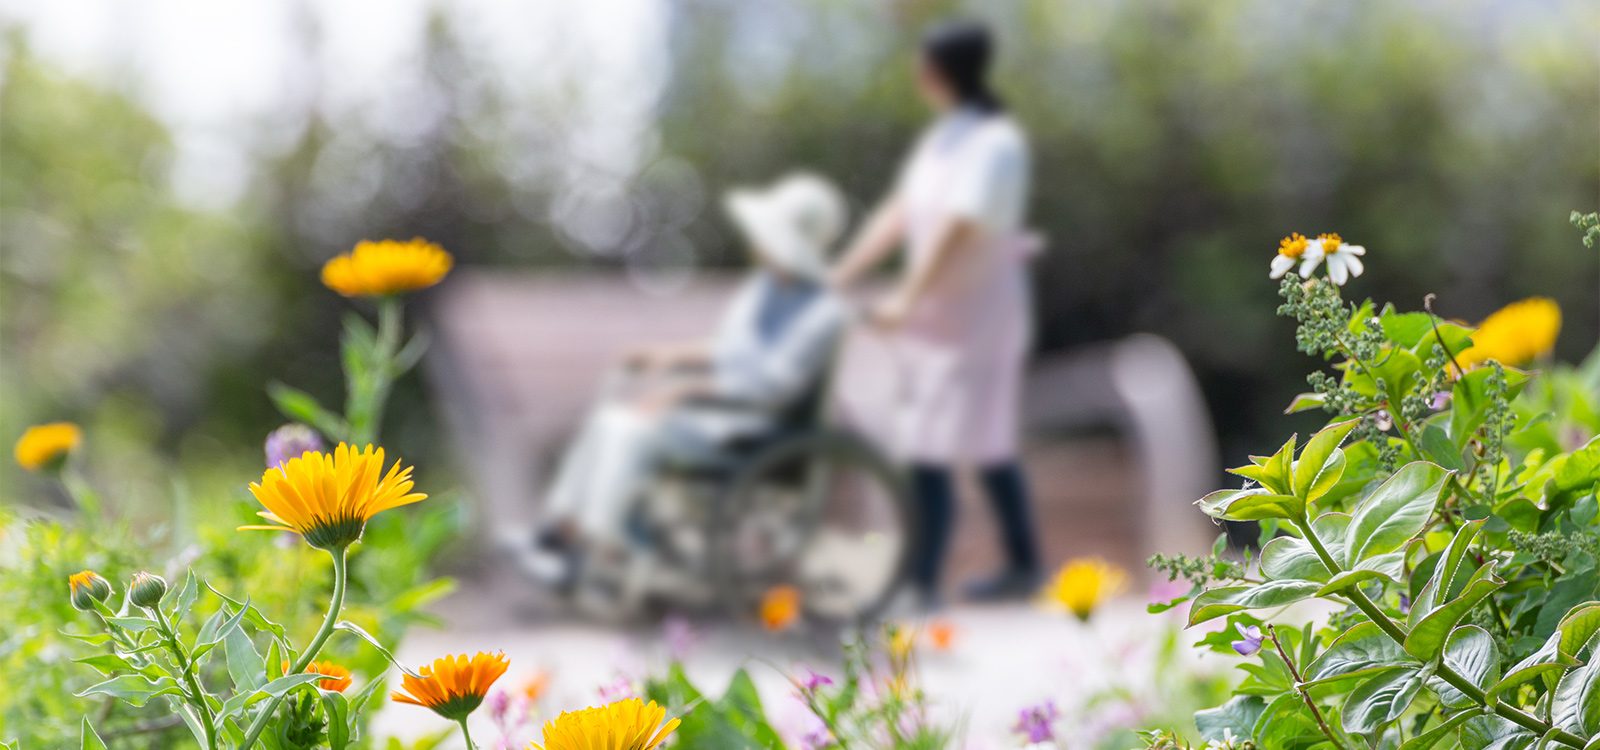 Assessing sustainable aged care financing in Australia